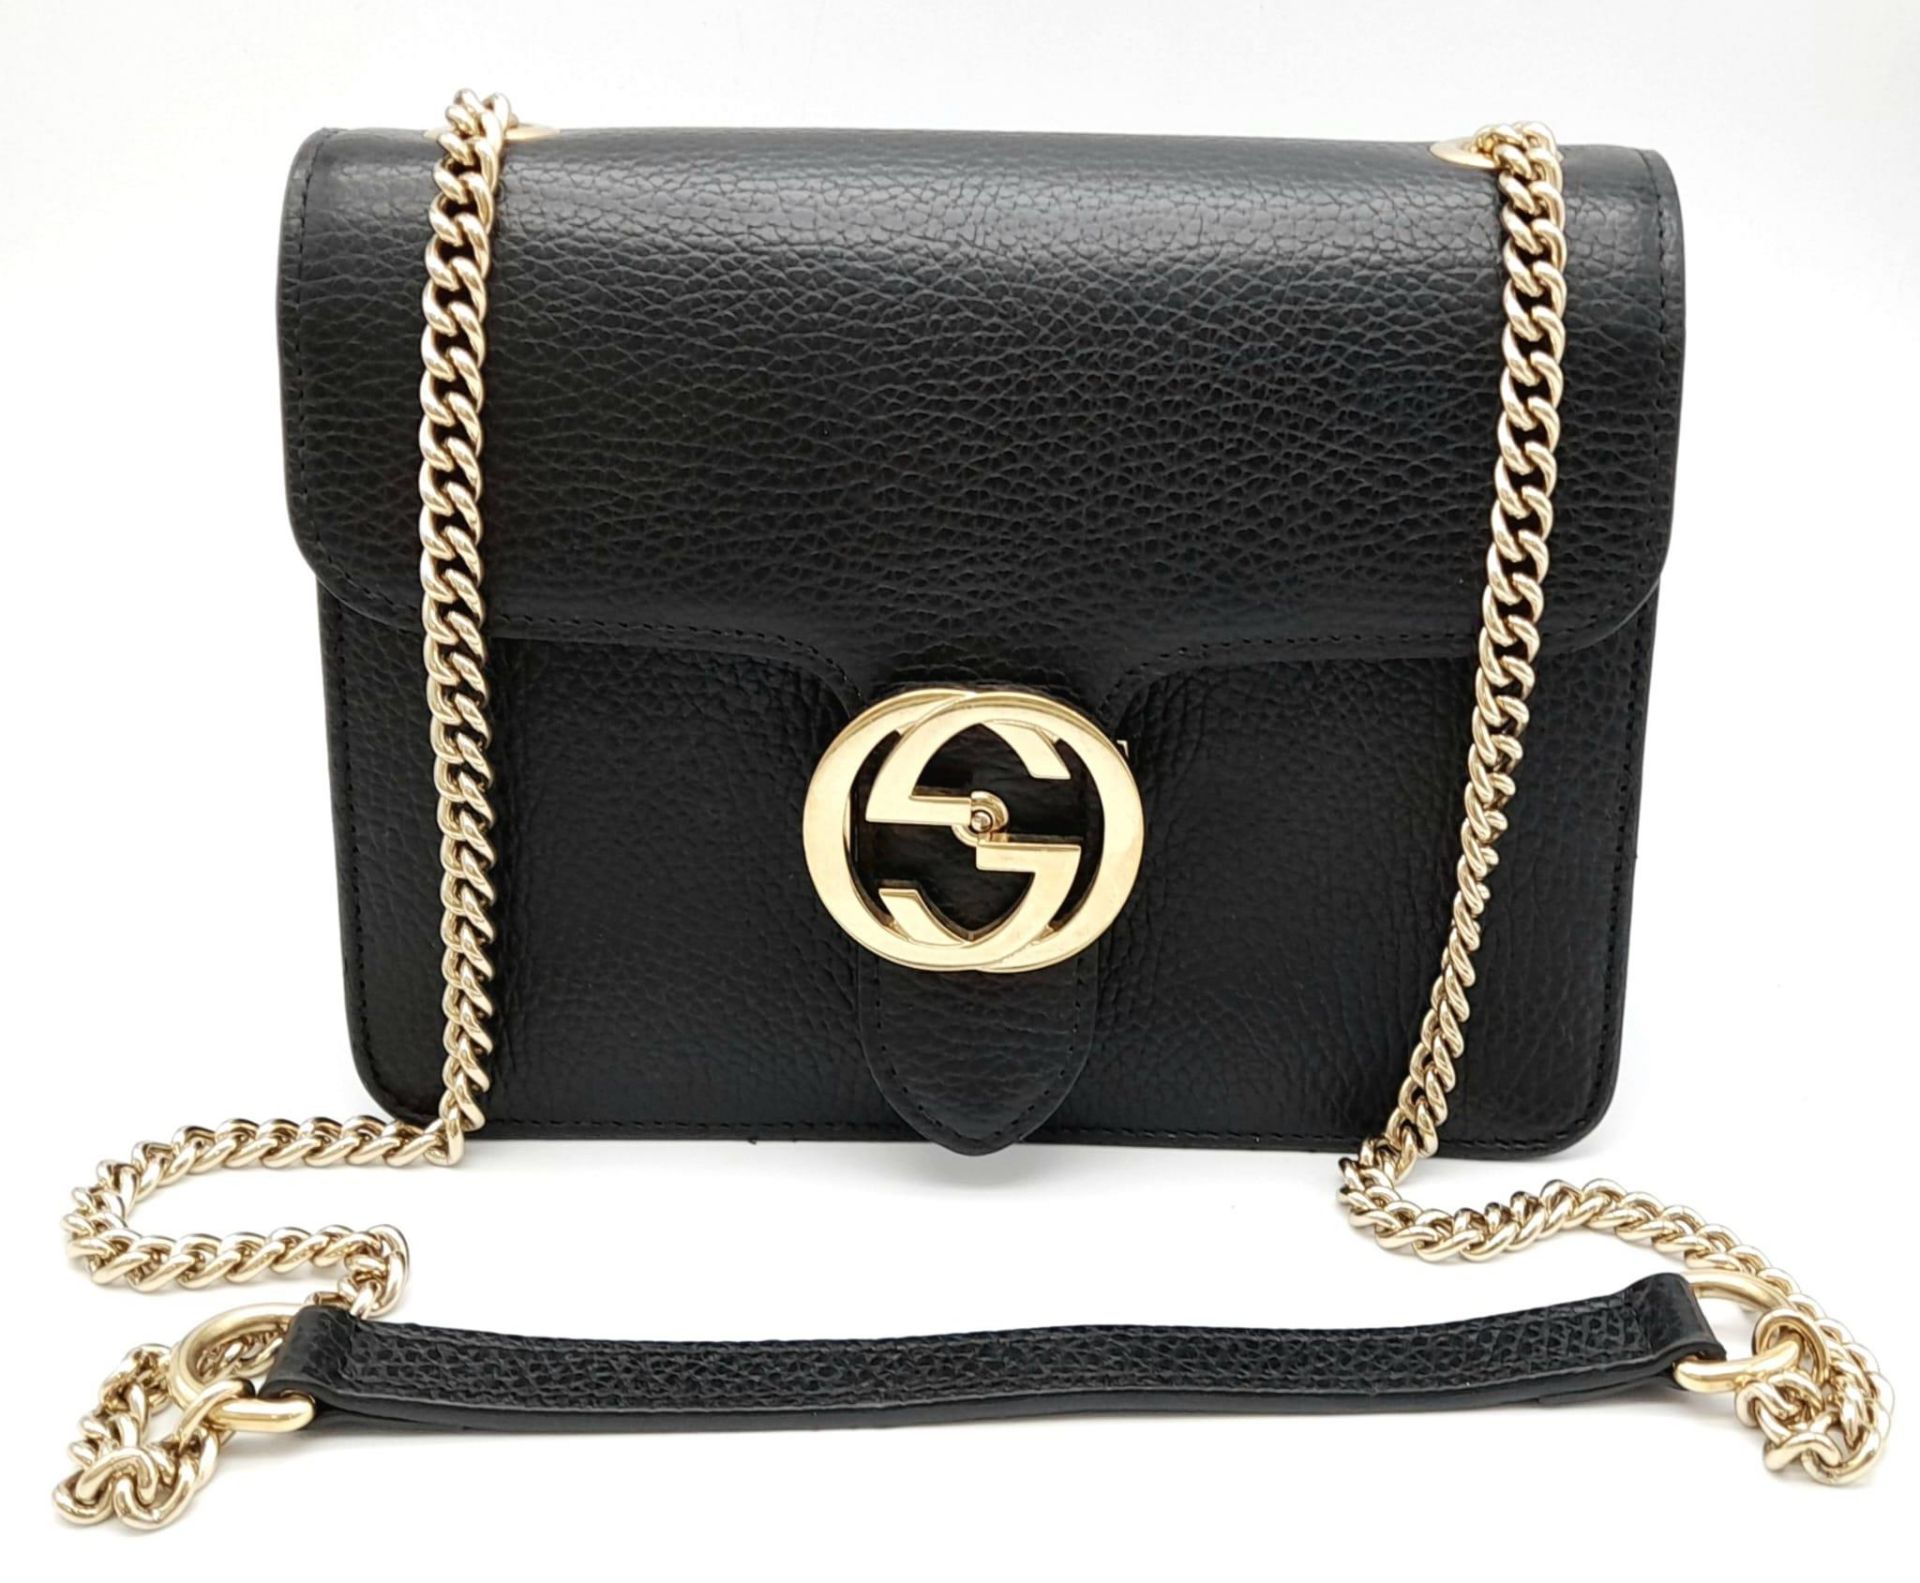 A Classic Gucci Interlocking Black Leather Hand/Shoulder bag. Gold tone hardware, Built in chain